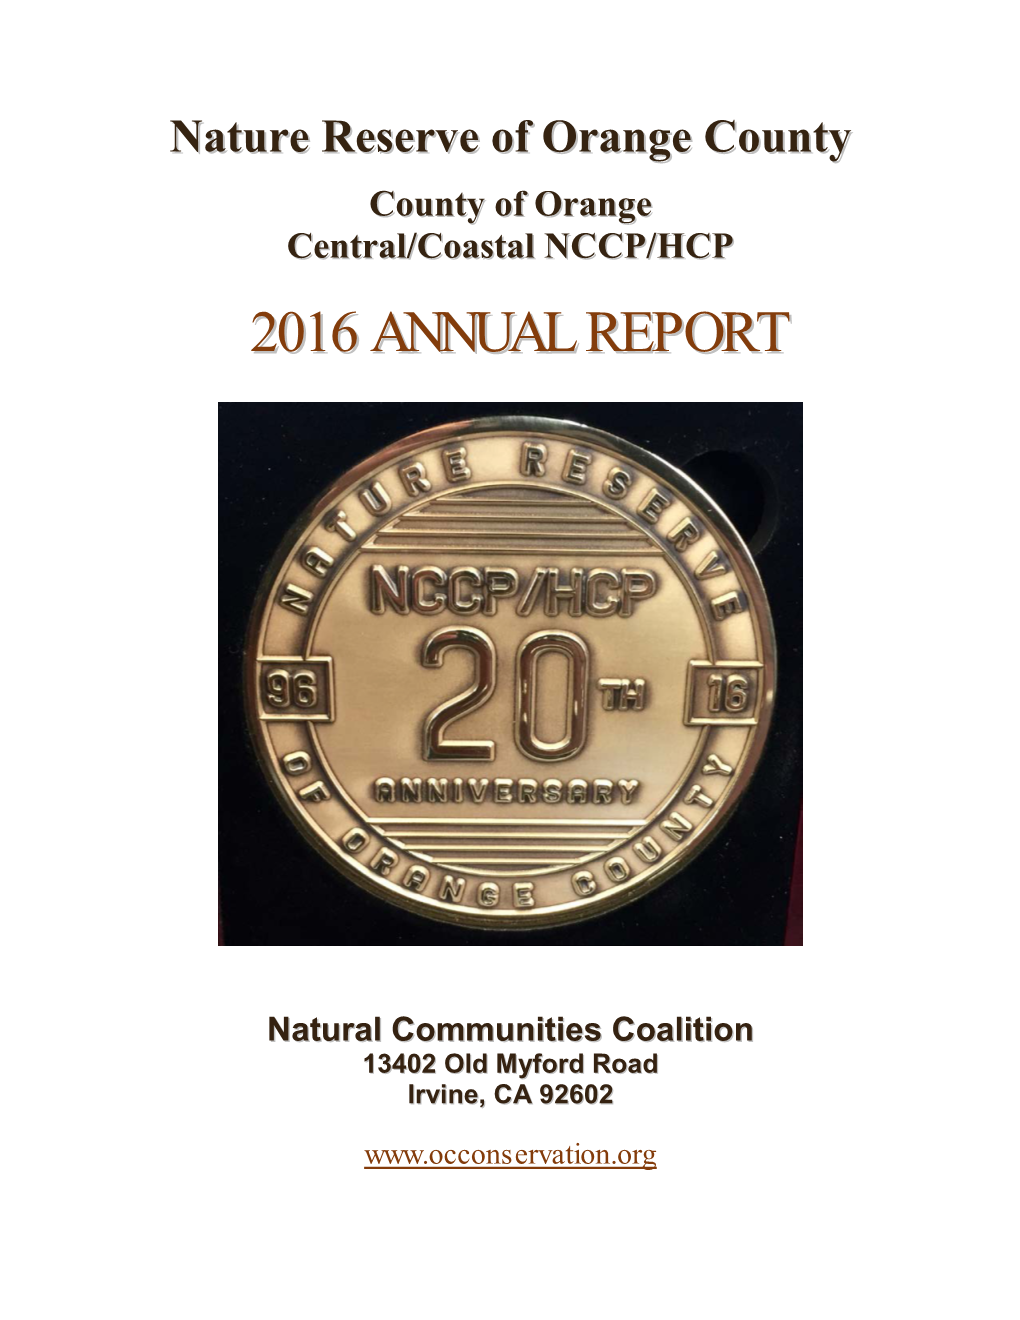 2016 Annual Report Submitted by the University of California, Irvine (UCI) to the Natural Communities Coalition (NCC)